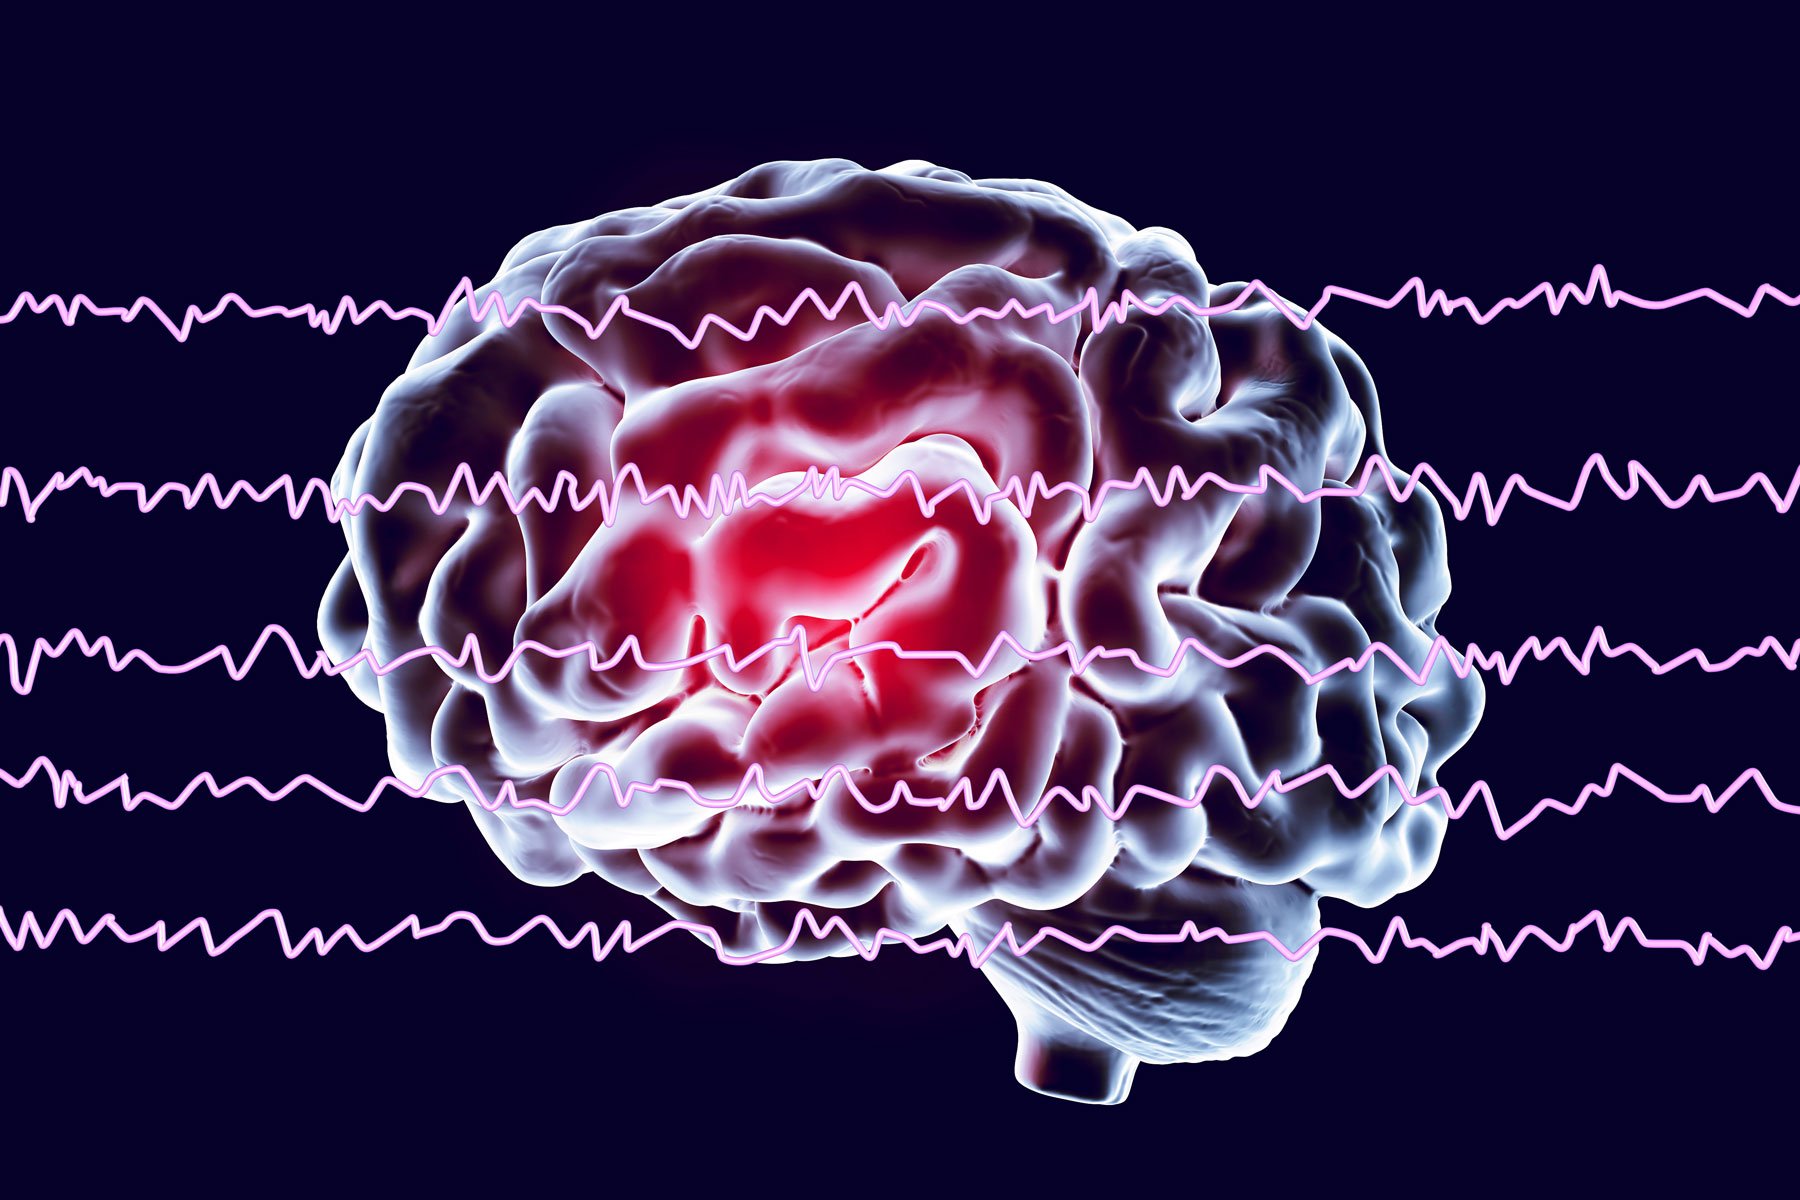 New research shows brain waves may impact glucose during sleep